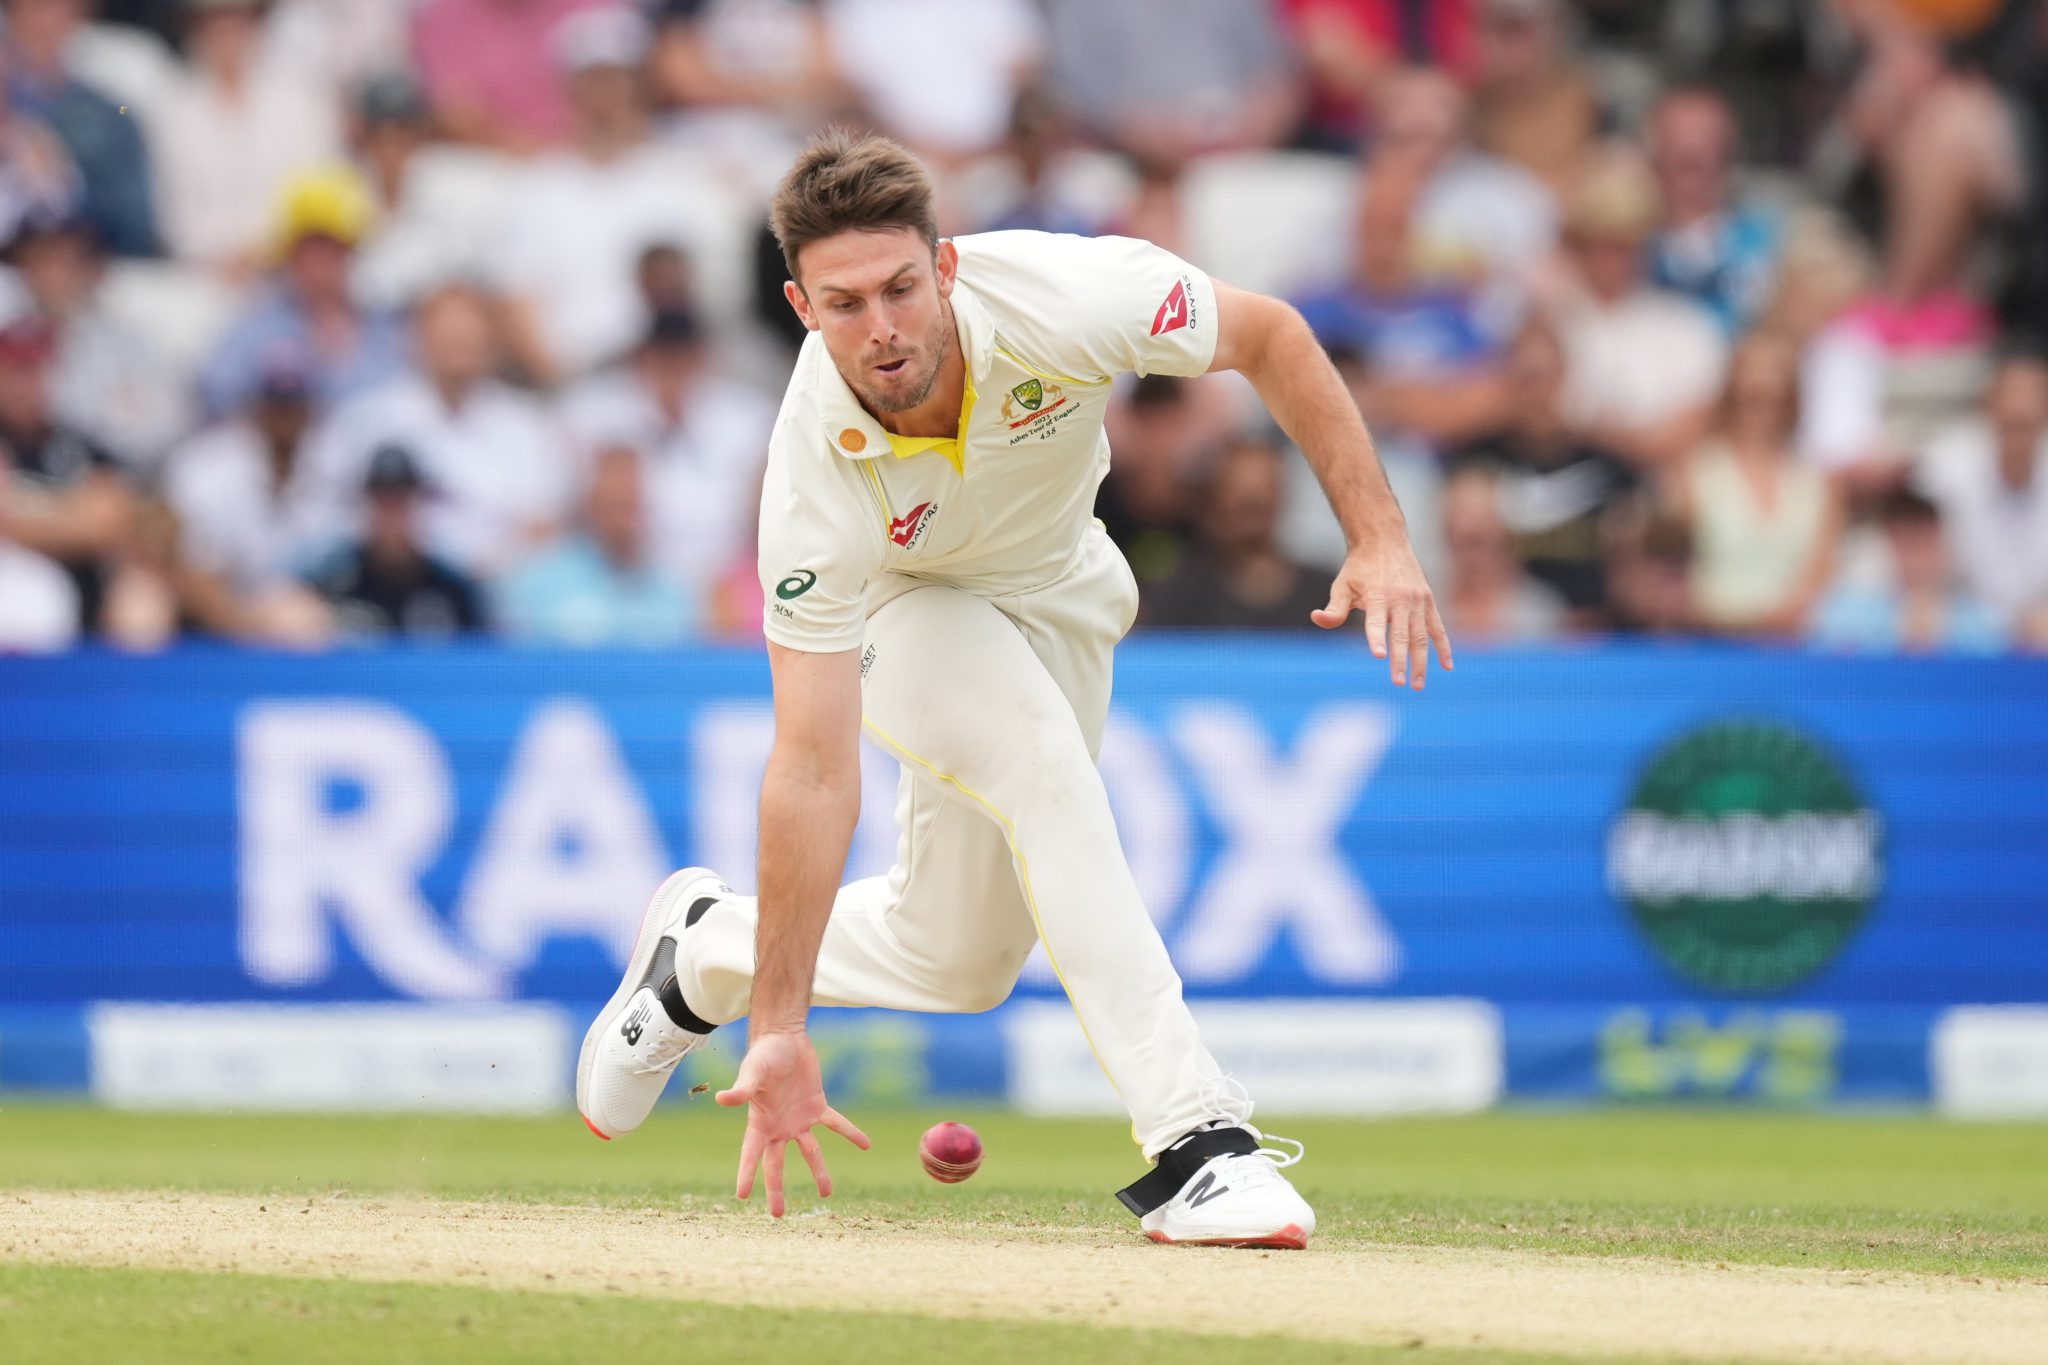 Mitch Marsh made a strong case to keep his Ashes place – Andrew McDonald